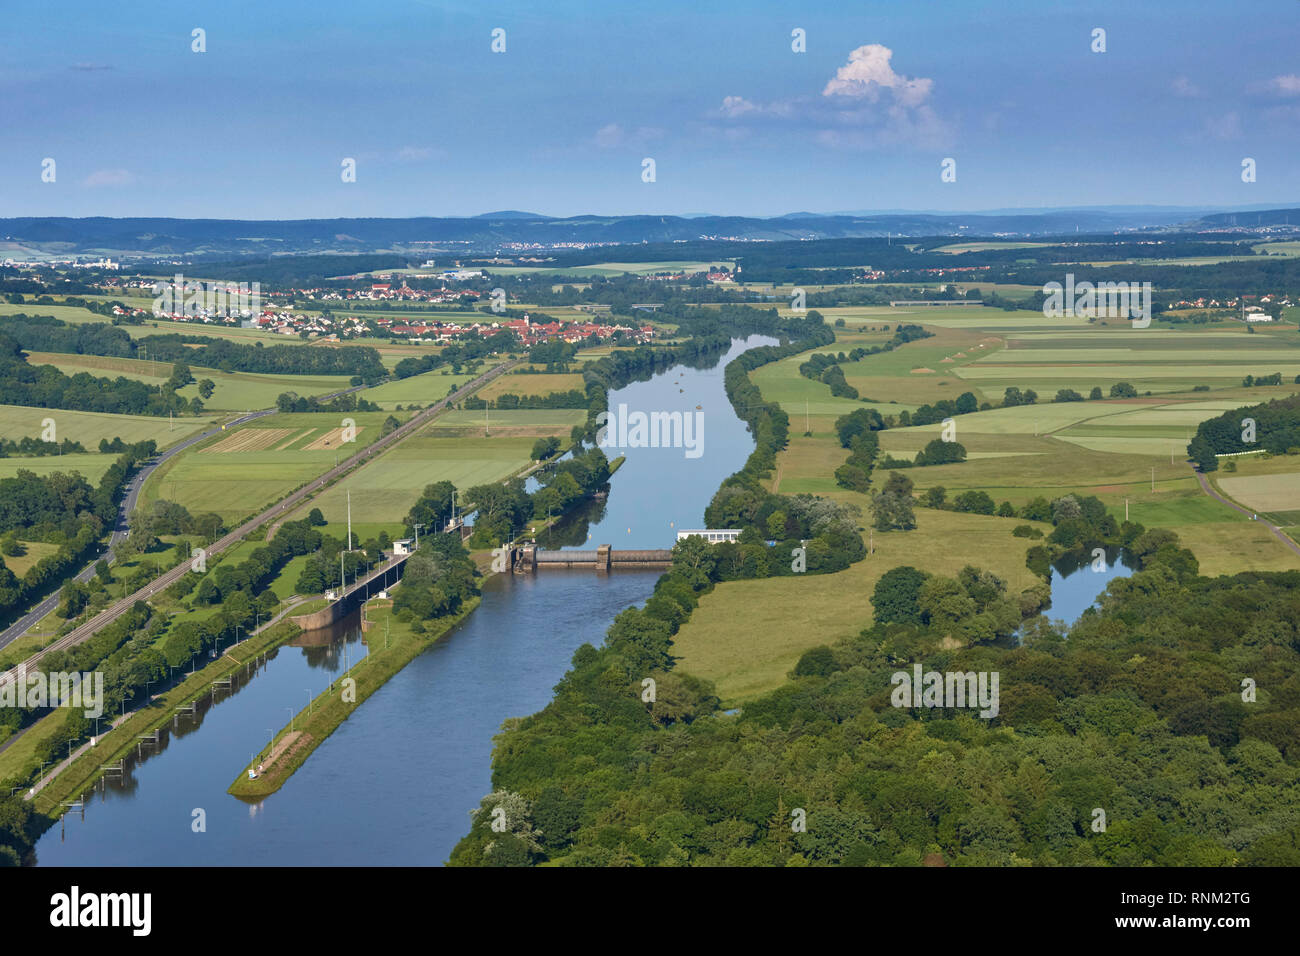 Lock Ottendorf on the river Main seen from the air. Bavaria, Germany. Stock Photo